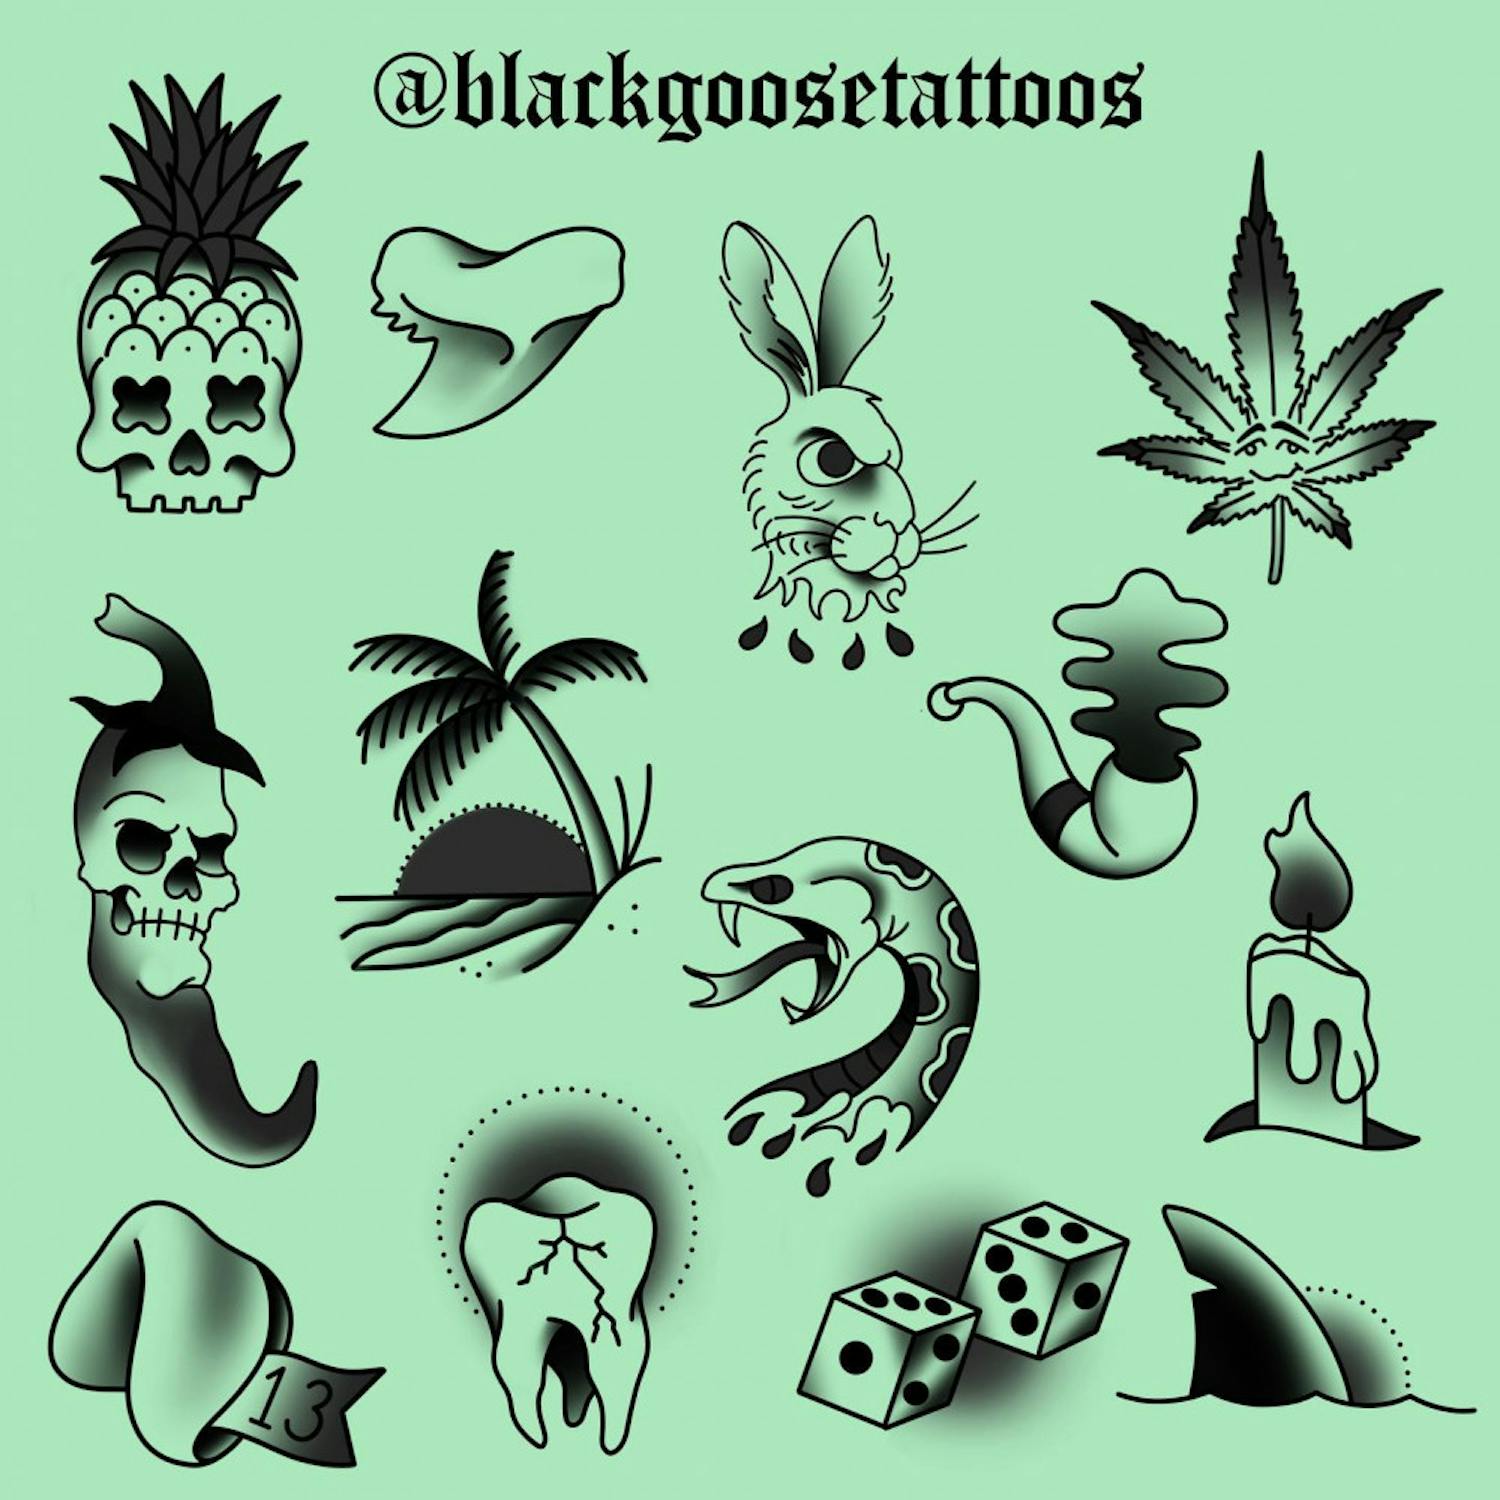 For this Friday the 13th, Oasis Tattoo Collective is offering $31 tattoos with a $9 tip from two flash sheets with 29 designs.  